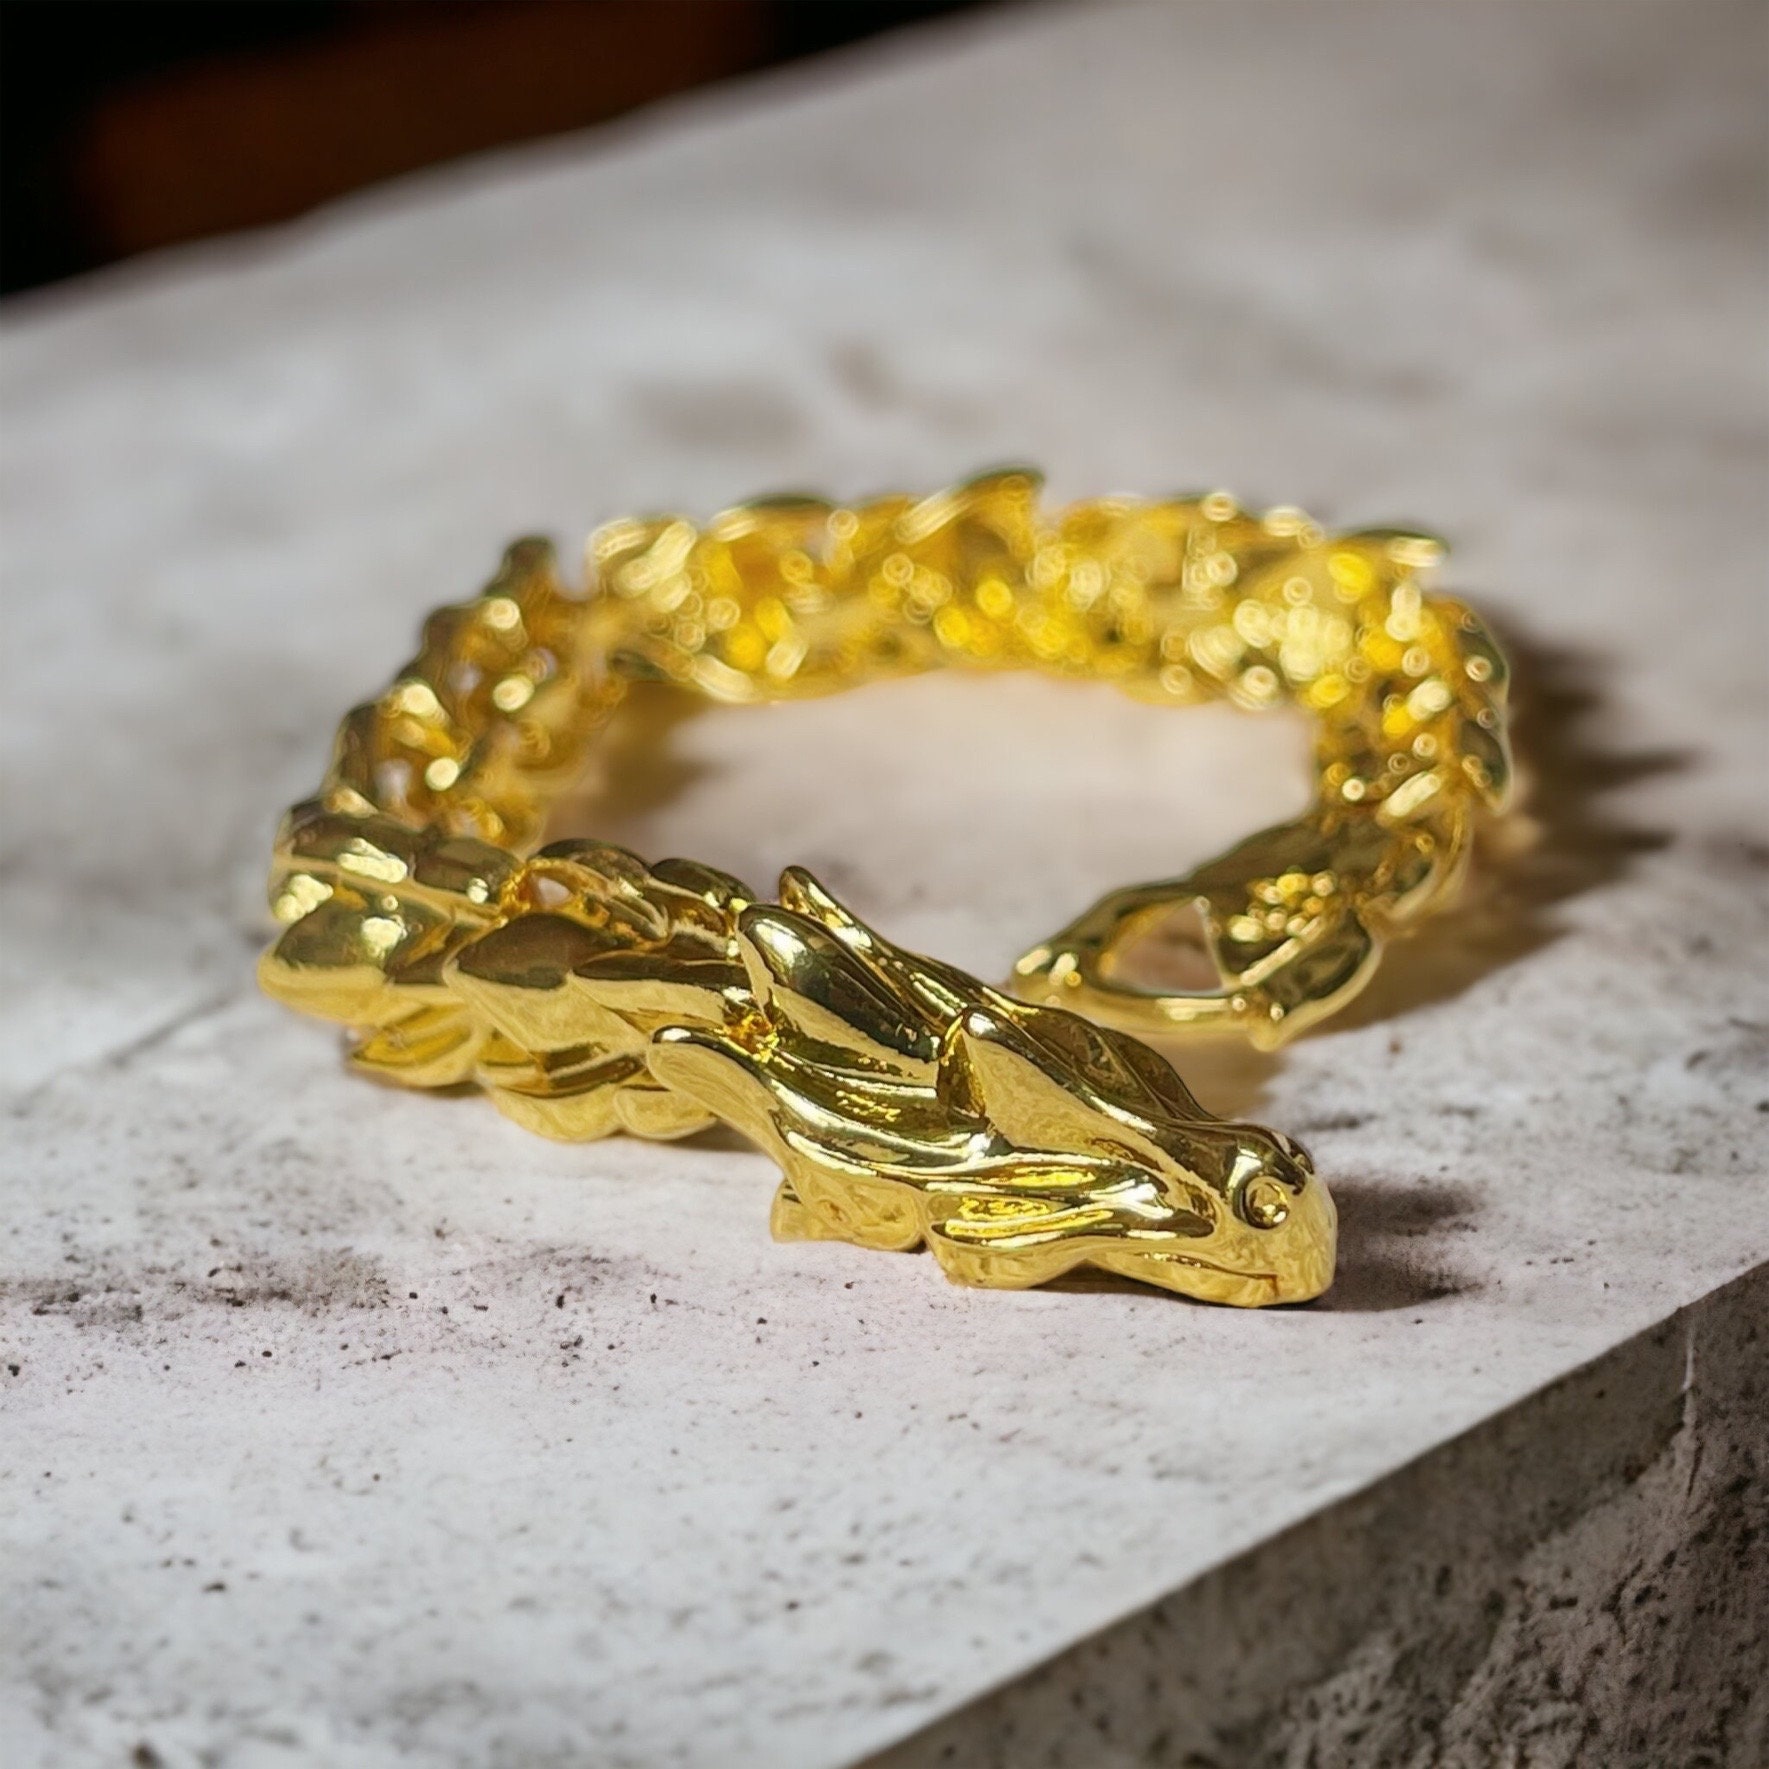 Buy Fine Gold Bangle Dragon Phoenix Bracelet 14k Gold, Traditional Chinese Gold  Bracelet, Two Tone Gold Bangle, Wedding Gift for Her Online in India - Etsy